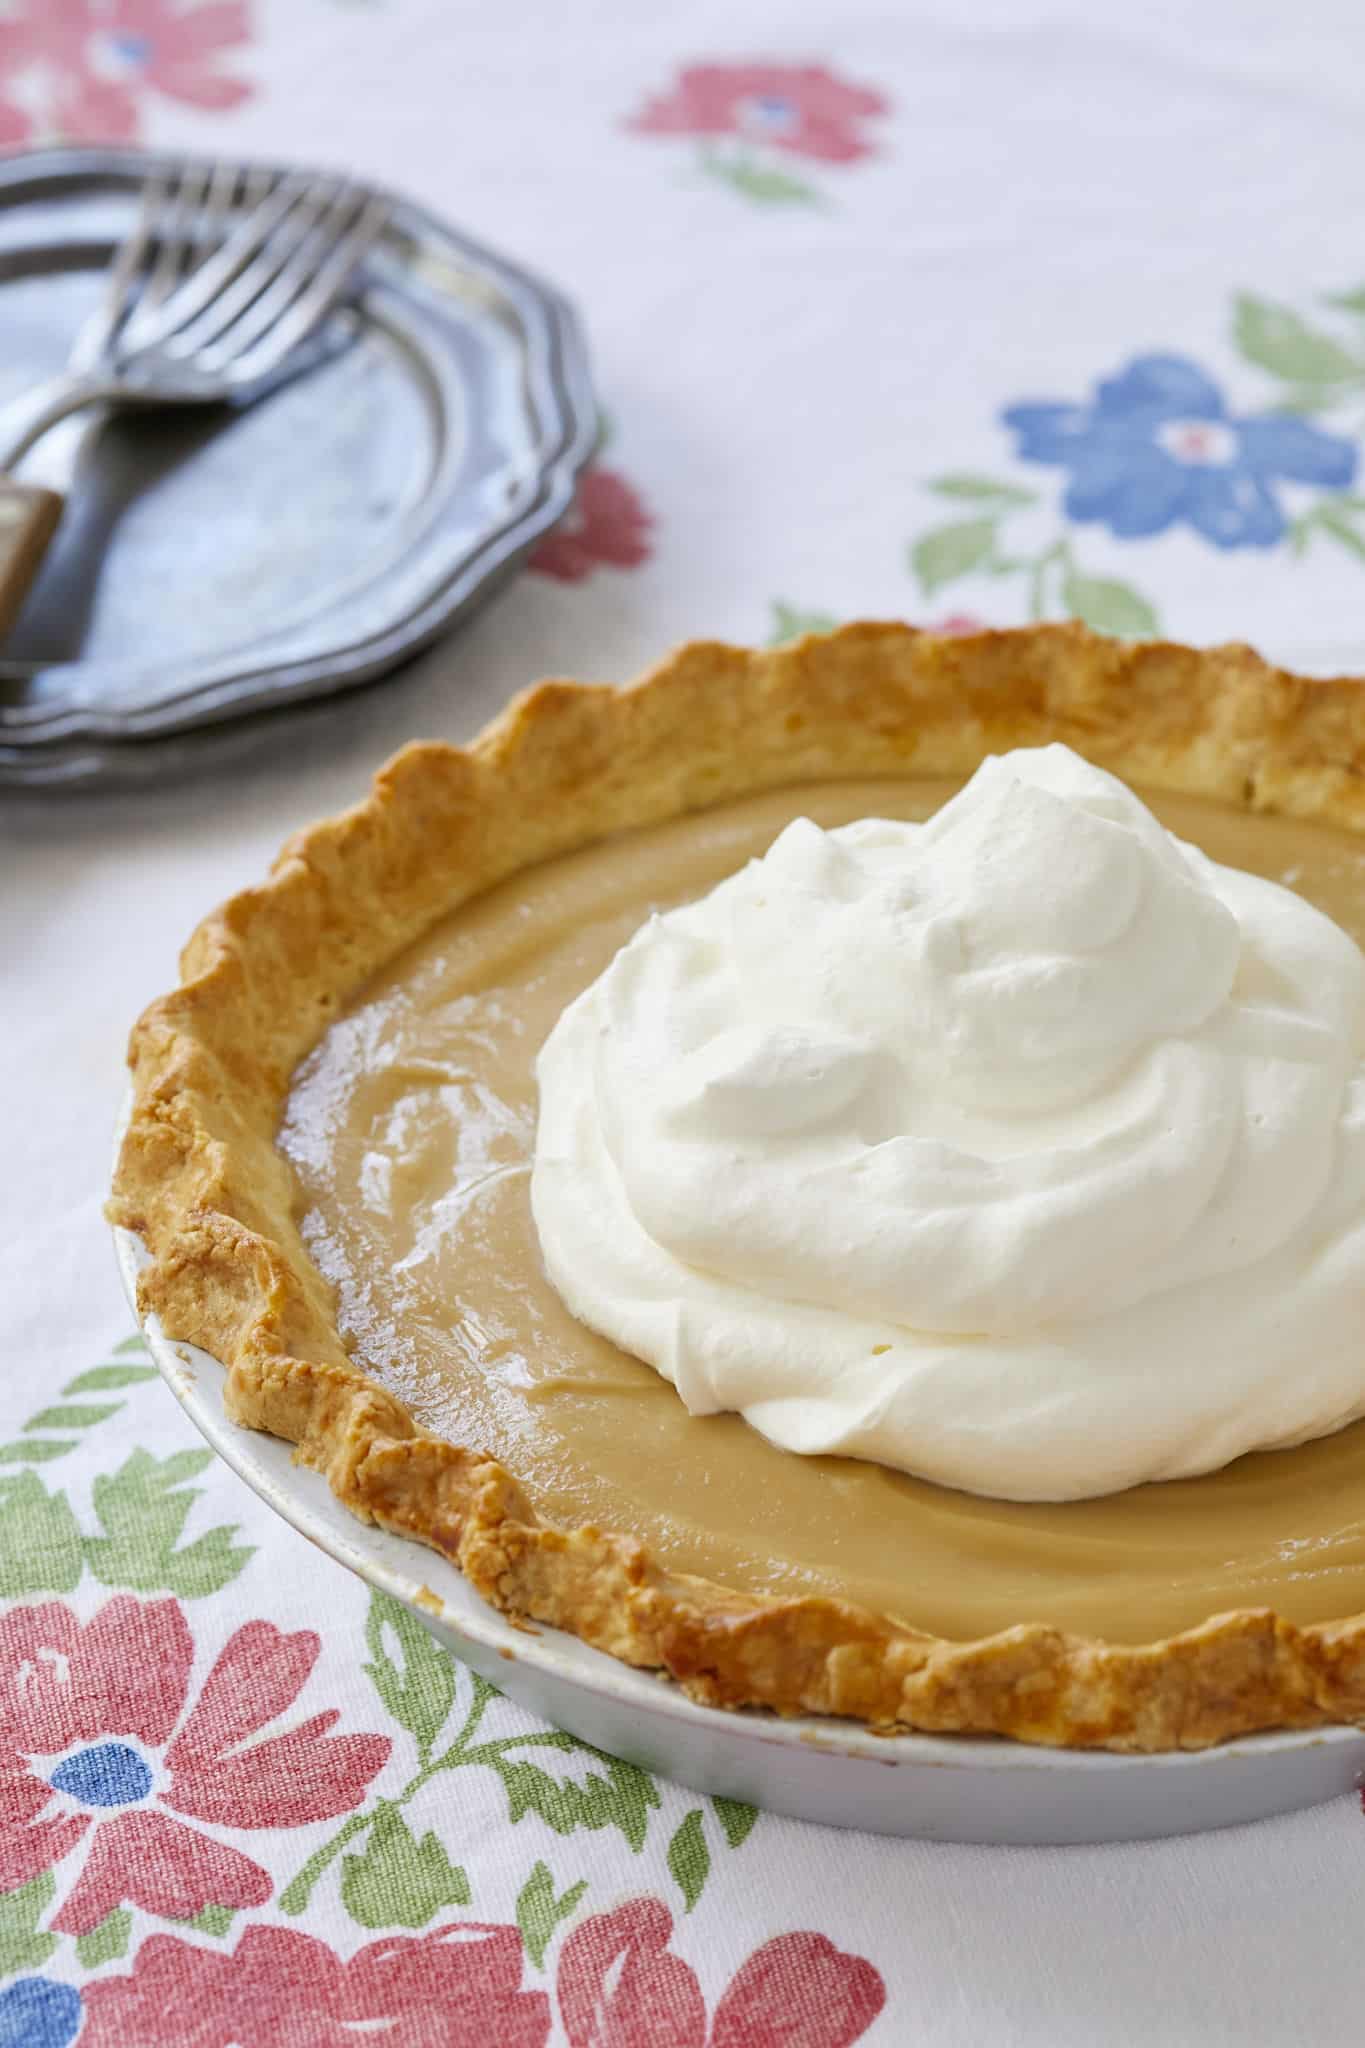 Maple Cream Pie is displayed on a floral tablecloth under a large dollop of homemade whipped cream. 